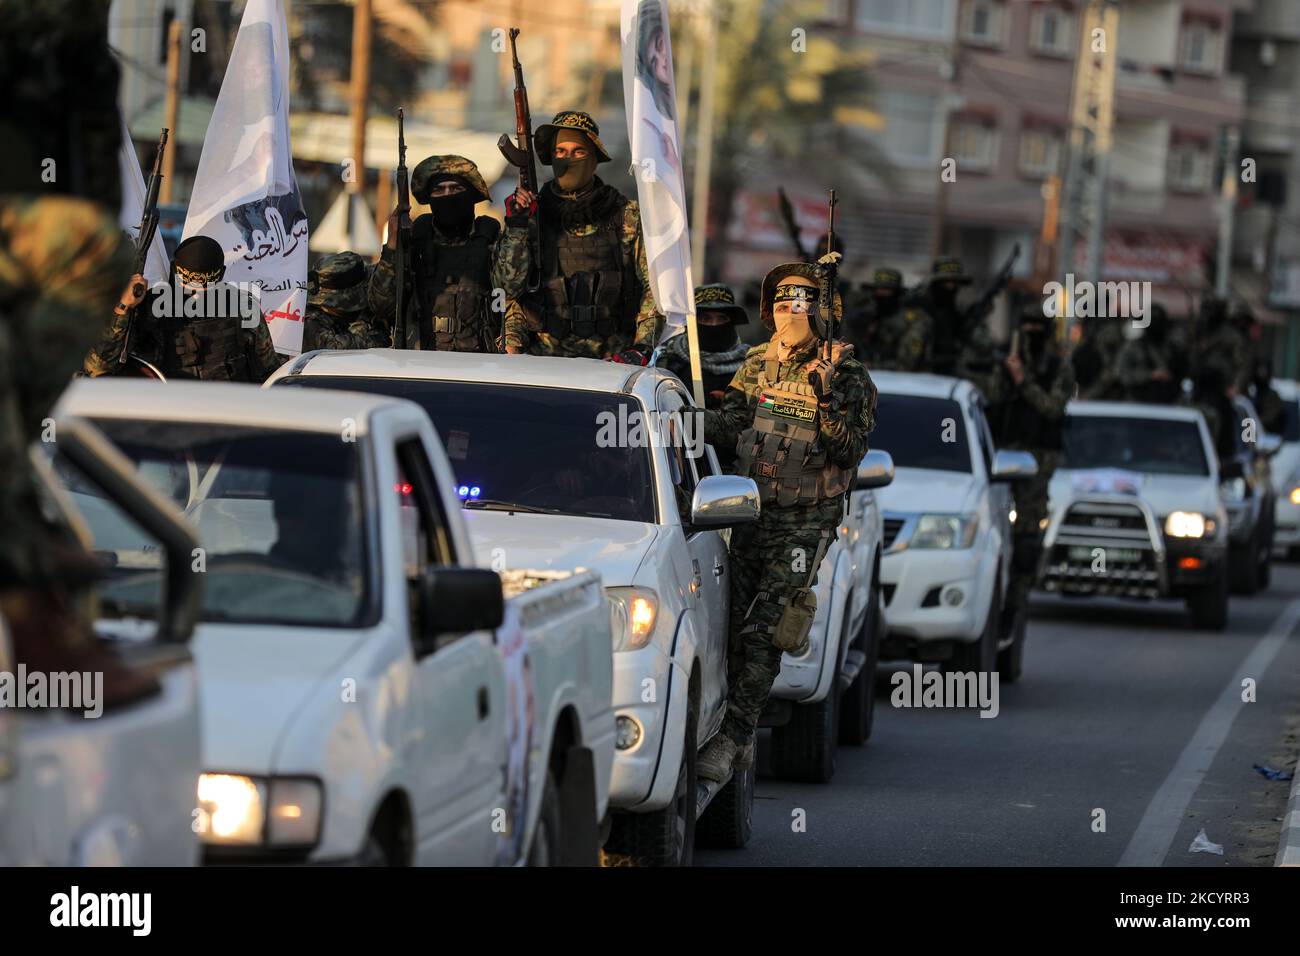 Palestinian members of the Al-Quds Brigades, the military wing of the Islamic Jihad group, march with their rifles along the main road of Gaza Strip, take part in a military parade to celebrate after â€‹a Palestinian prisoner Hisham Abu Hawash who ended his hunger strike after Israel committed to his eventual release, on January 5, 2022. (Photo by Majdi Fathi/NurPhoto) Stock Photo